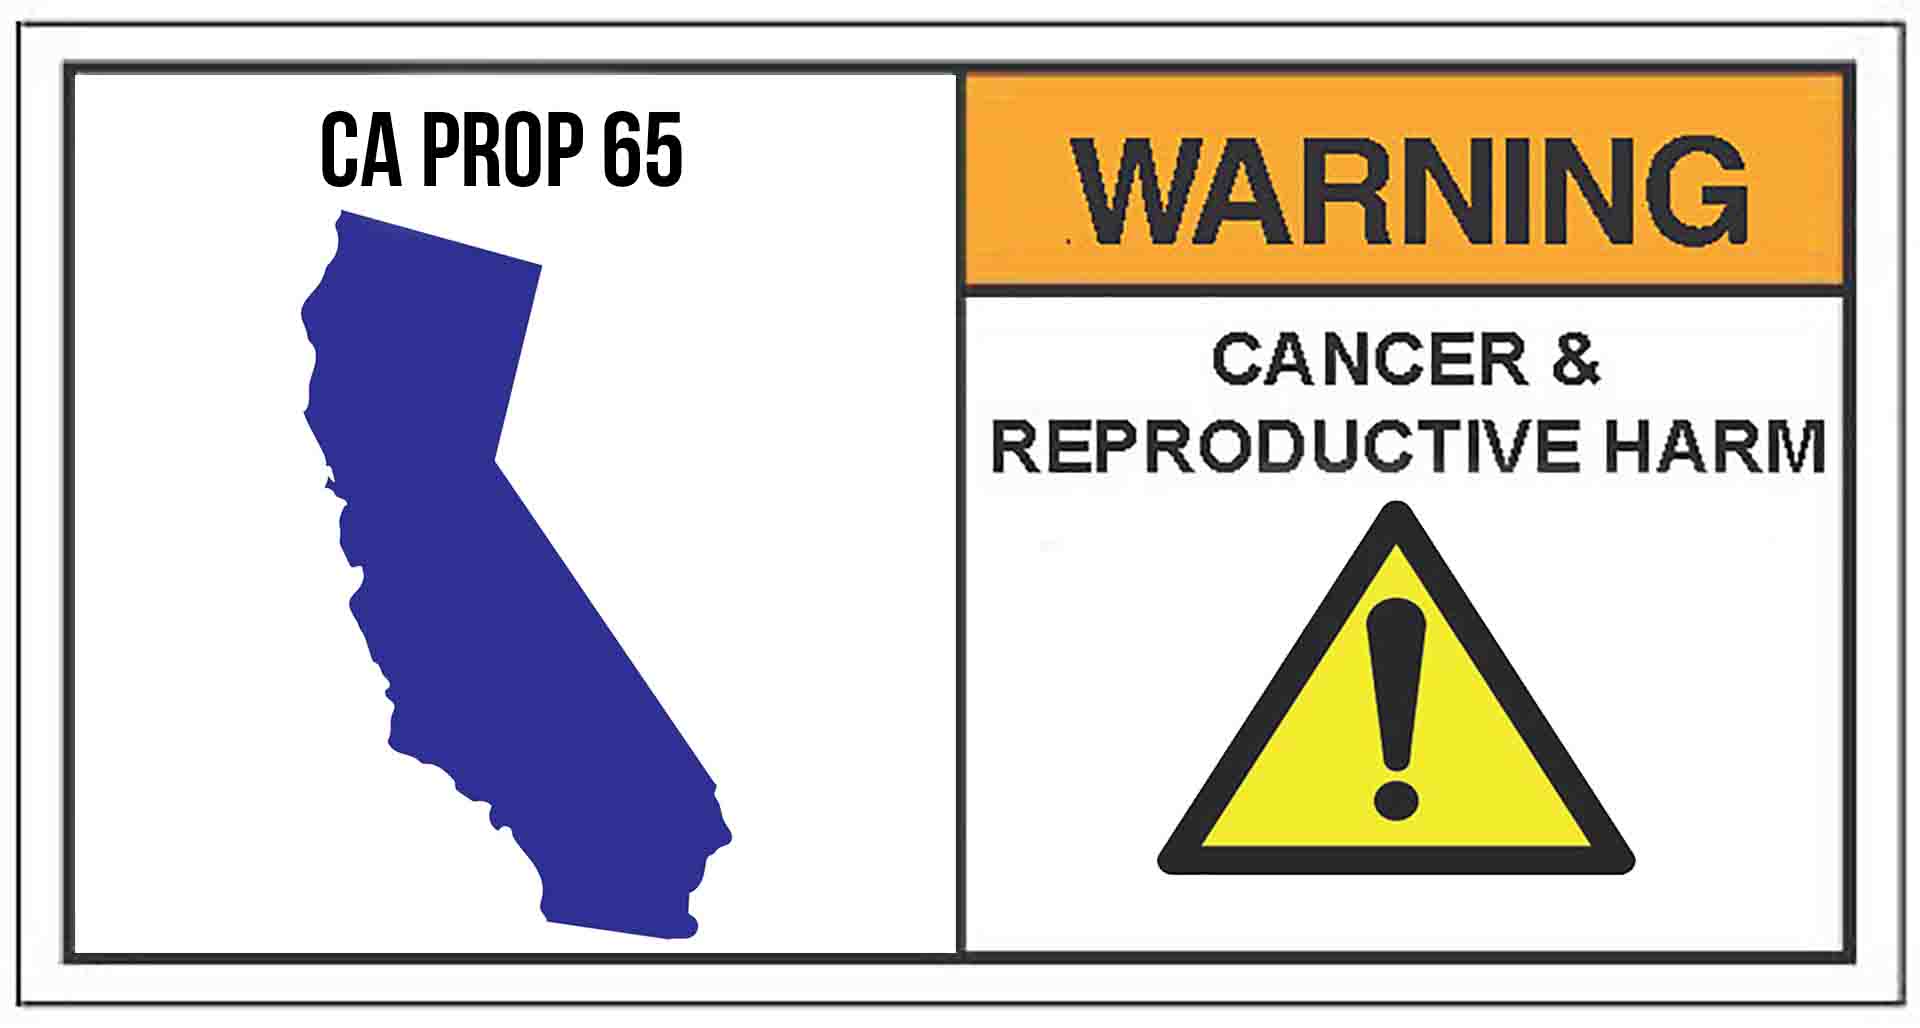 Prop 65 Compliance: Ensuring Safe Products and Environment